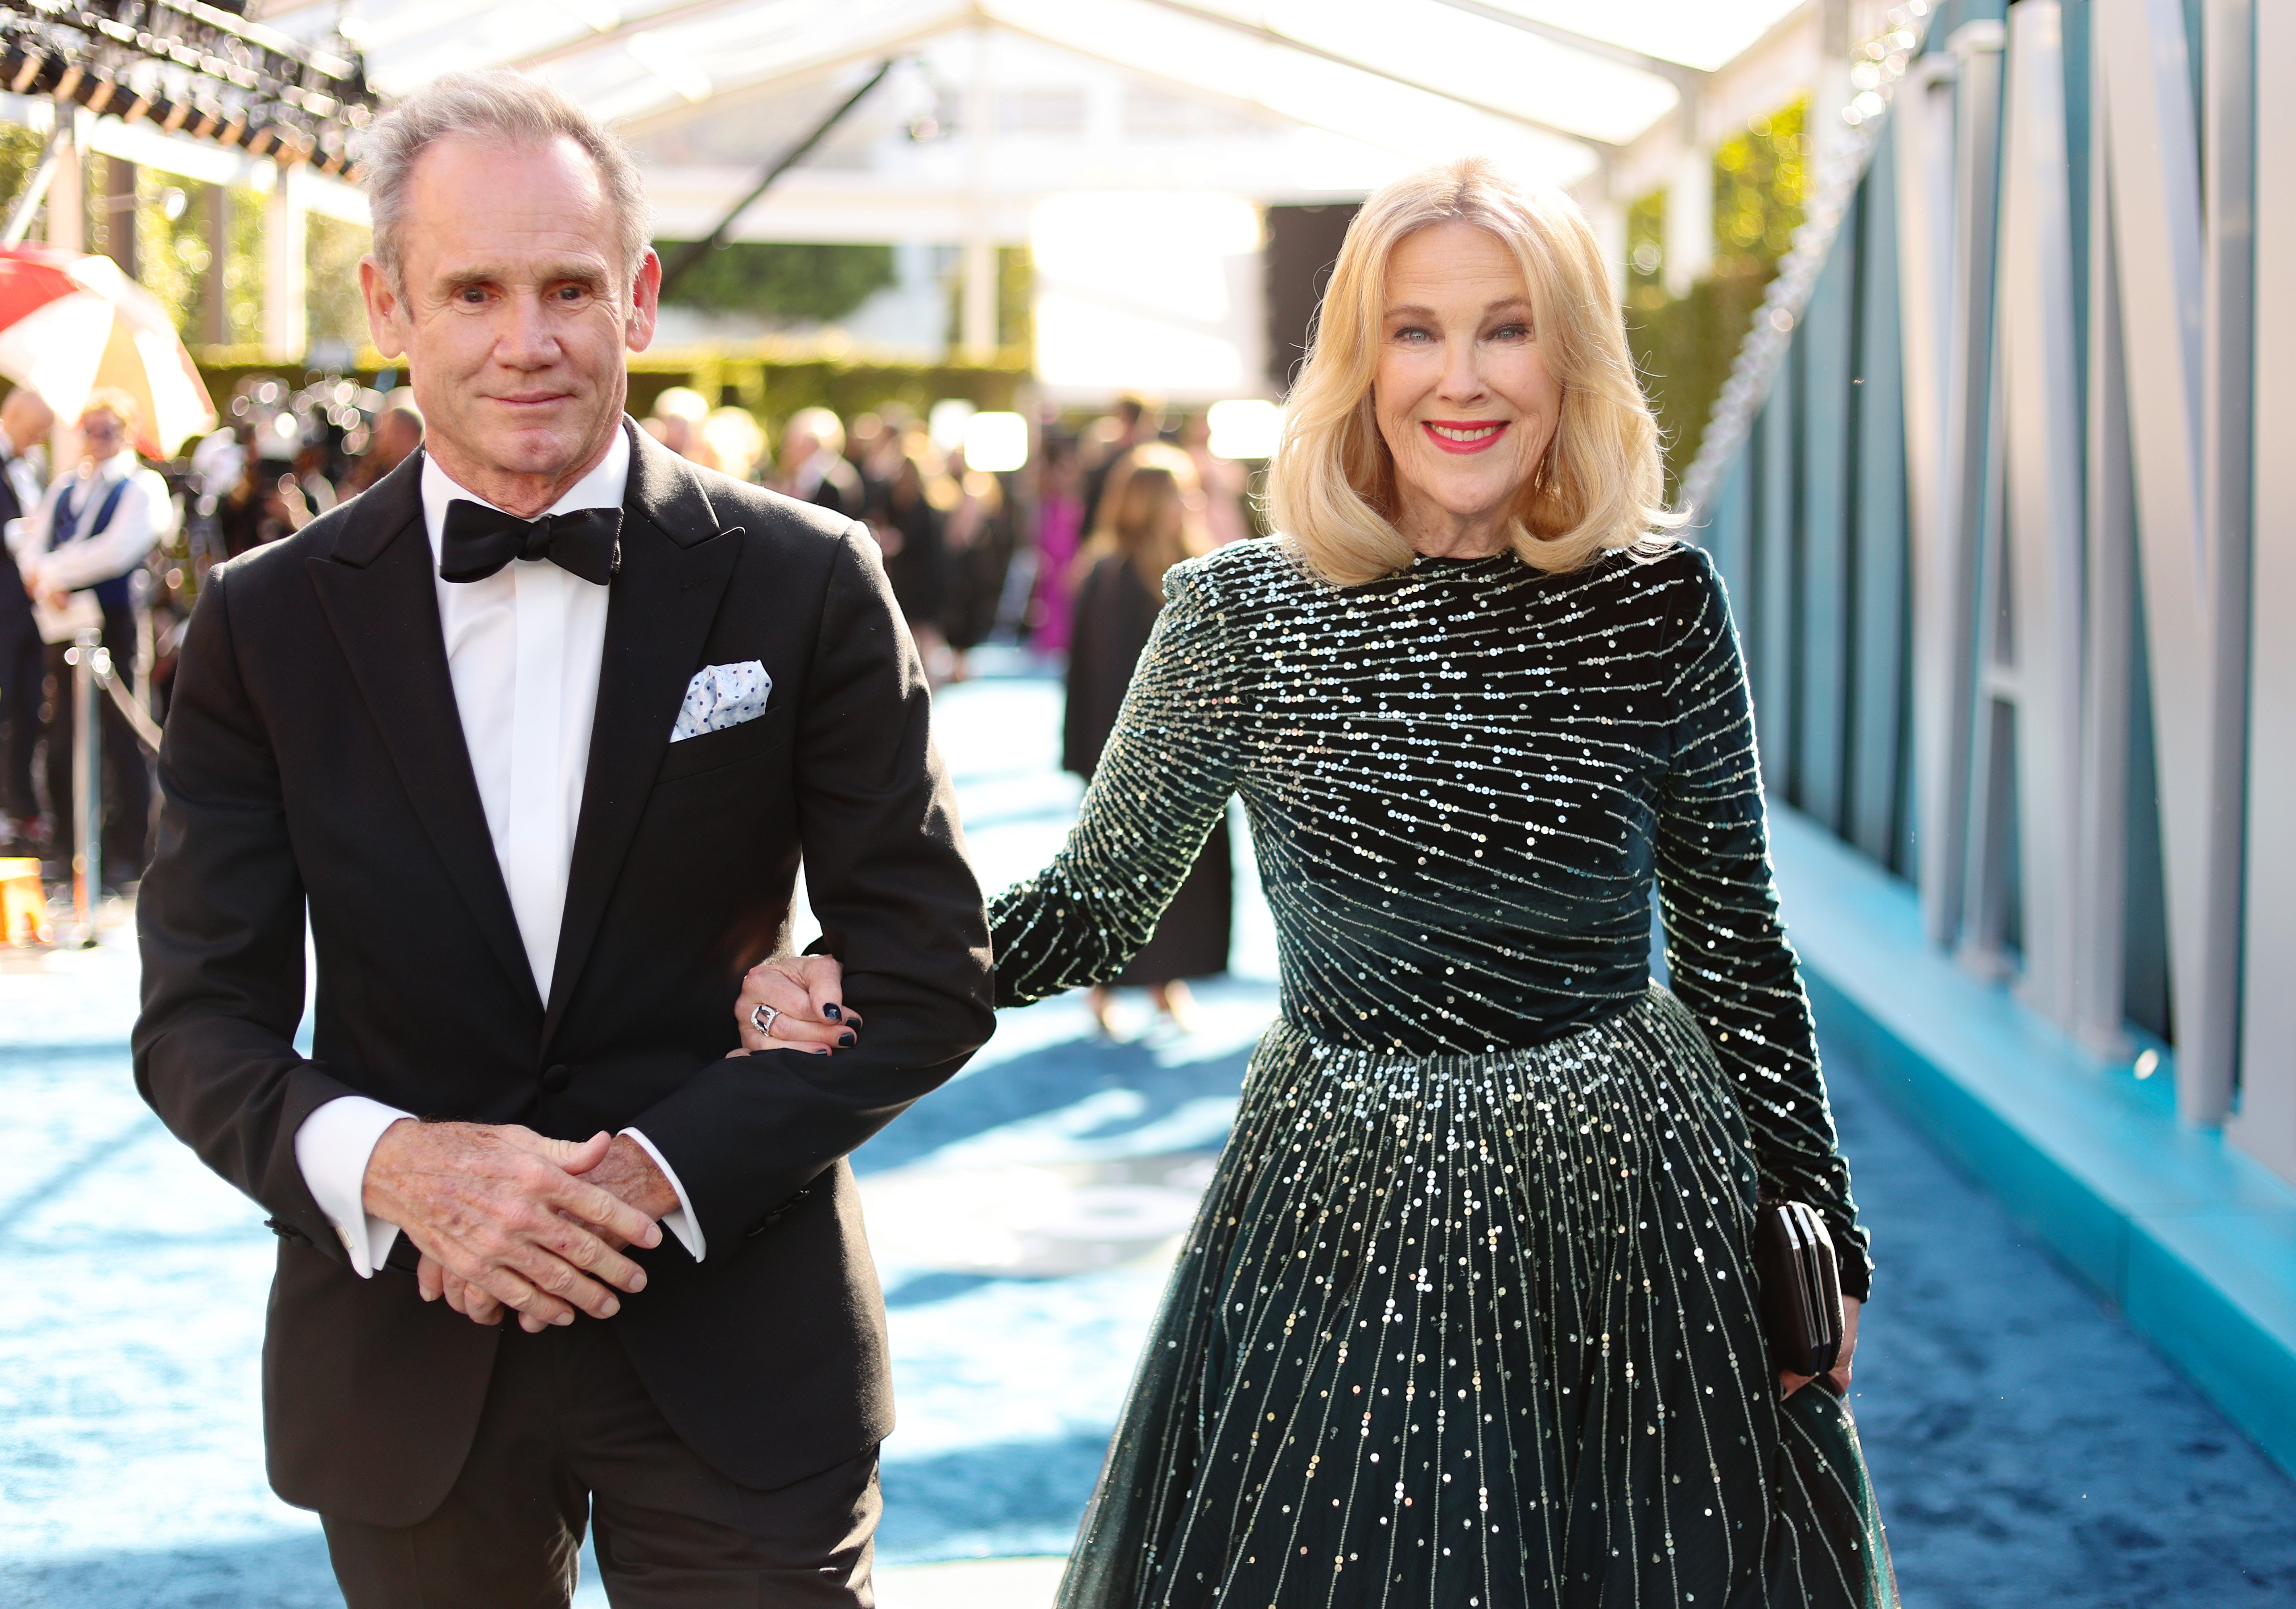  Bo Welch and Catherine O'Hara attend the 2022 Vanity Fair Oscar Party hosted by Radhika Jones at Wallis Annenberg Center for the Performing Arts on March 27, 2022 in Beverly Hills, California. | Source: Rich Fury/Getty Images